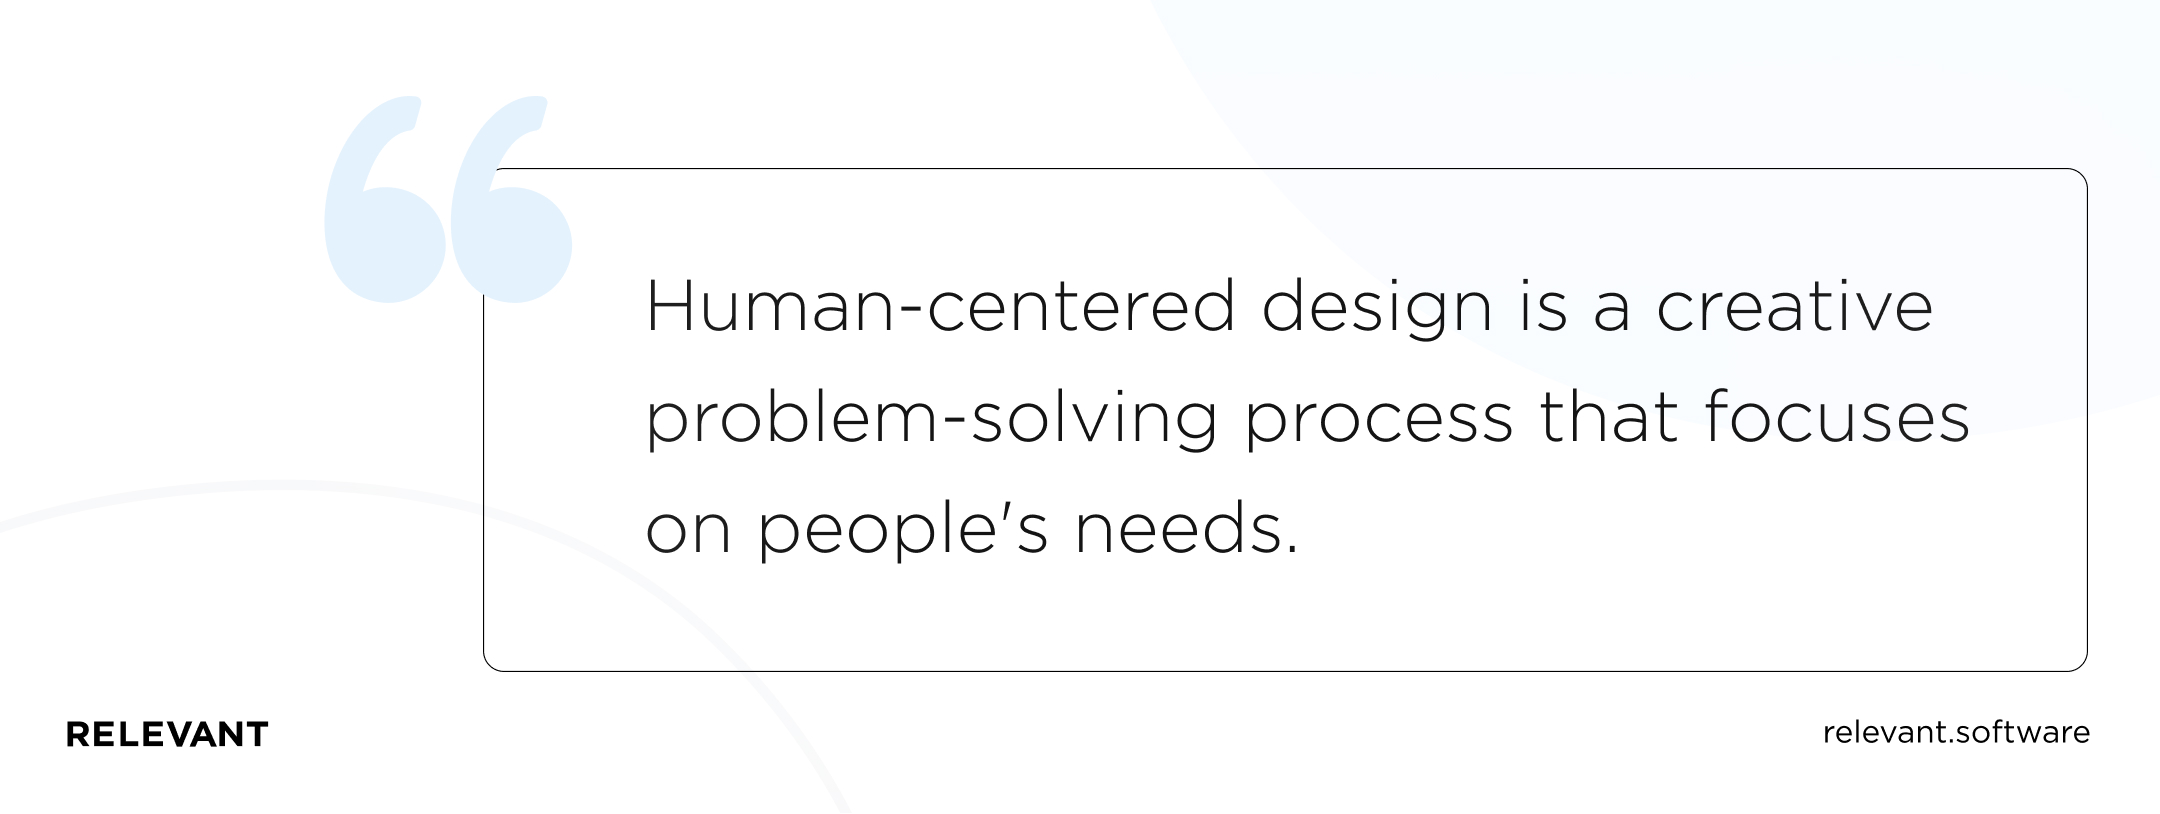 Human-centered design is a creative problem-solving process that focuses on people's needs.